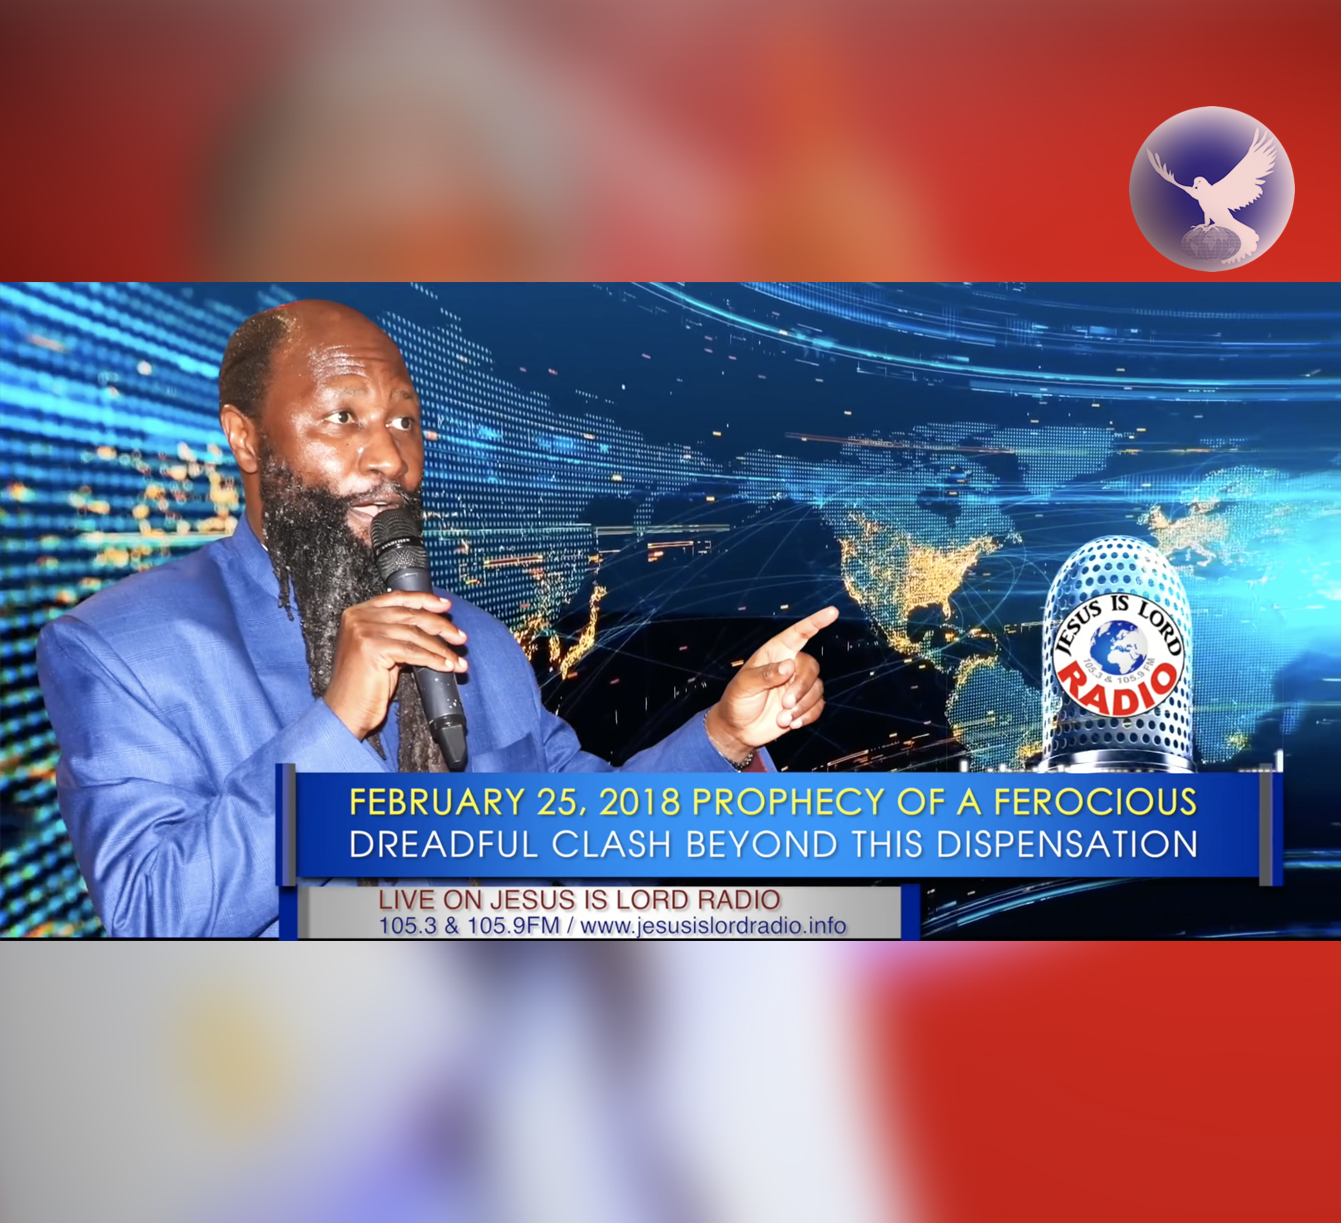 EPISODE 141 - PROPHECY OF TREMENDOUS, VICIOUS AND FEROCIOUS POST-RAPTURE MINISTRY OF THE 2 WITNESSES (25FEB2018) - PROPHET DR. OWUOR